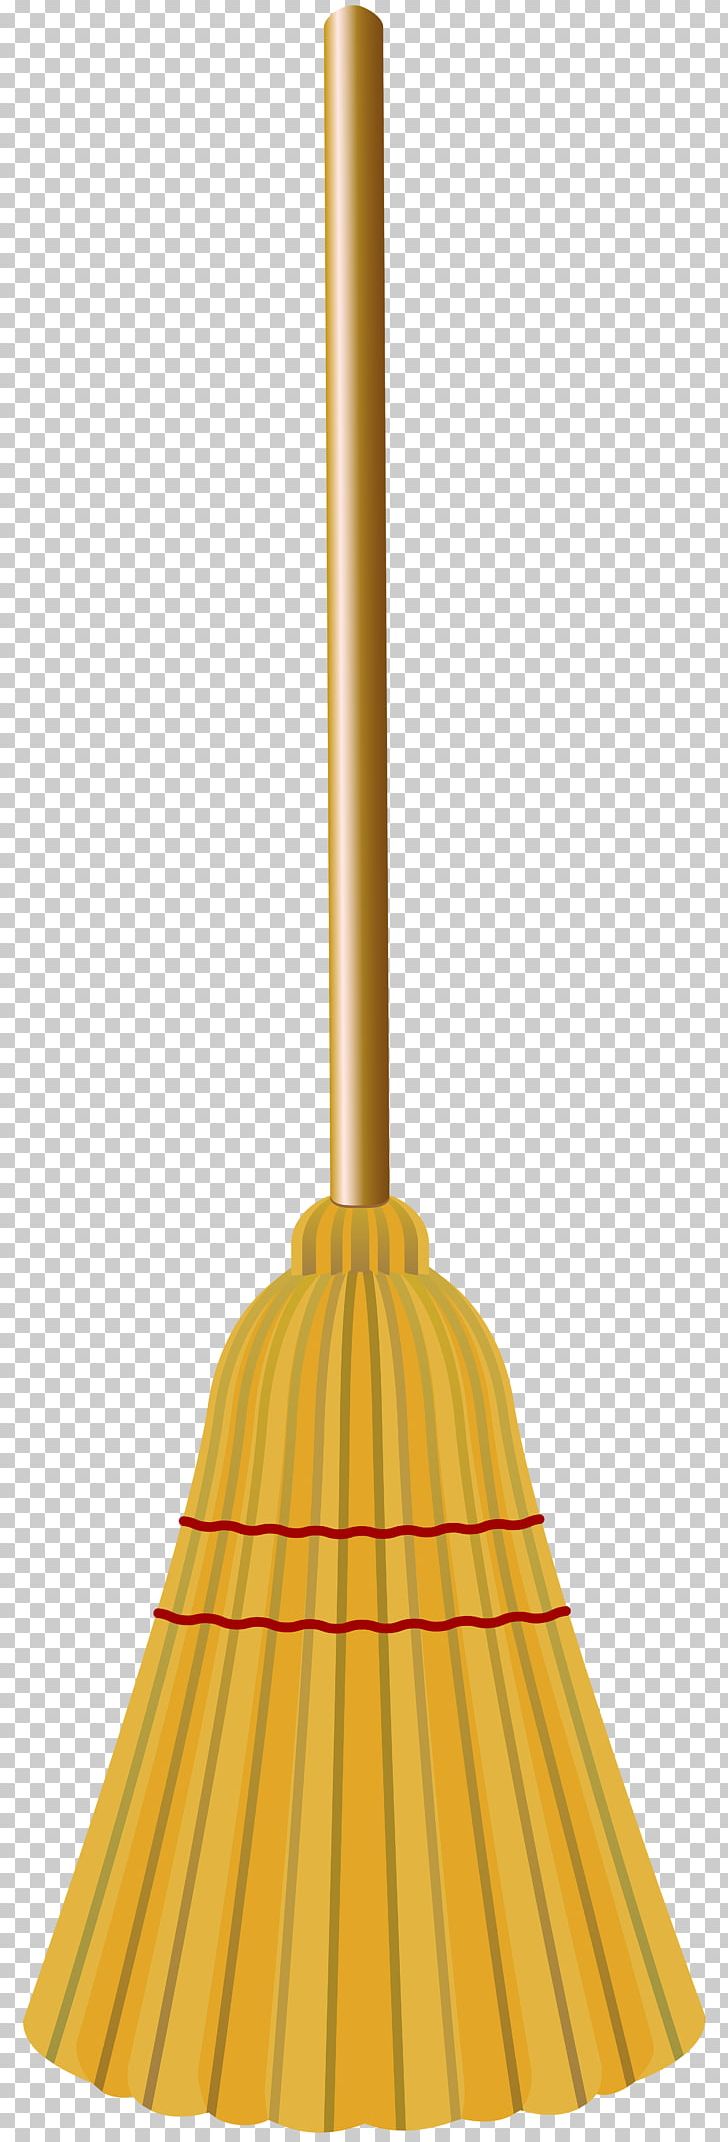 Broom Product Design Ceiling PNG, Clipart, Art, Broom, Ceiling, Ceiling Fixture, Cleaning Tool Free PNG Download